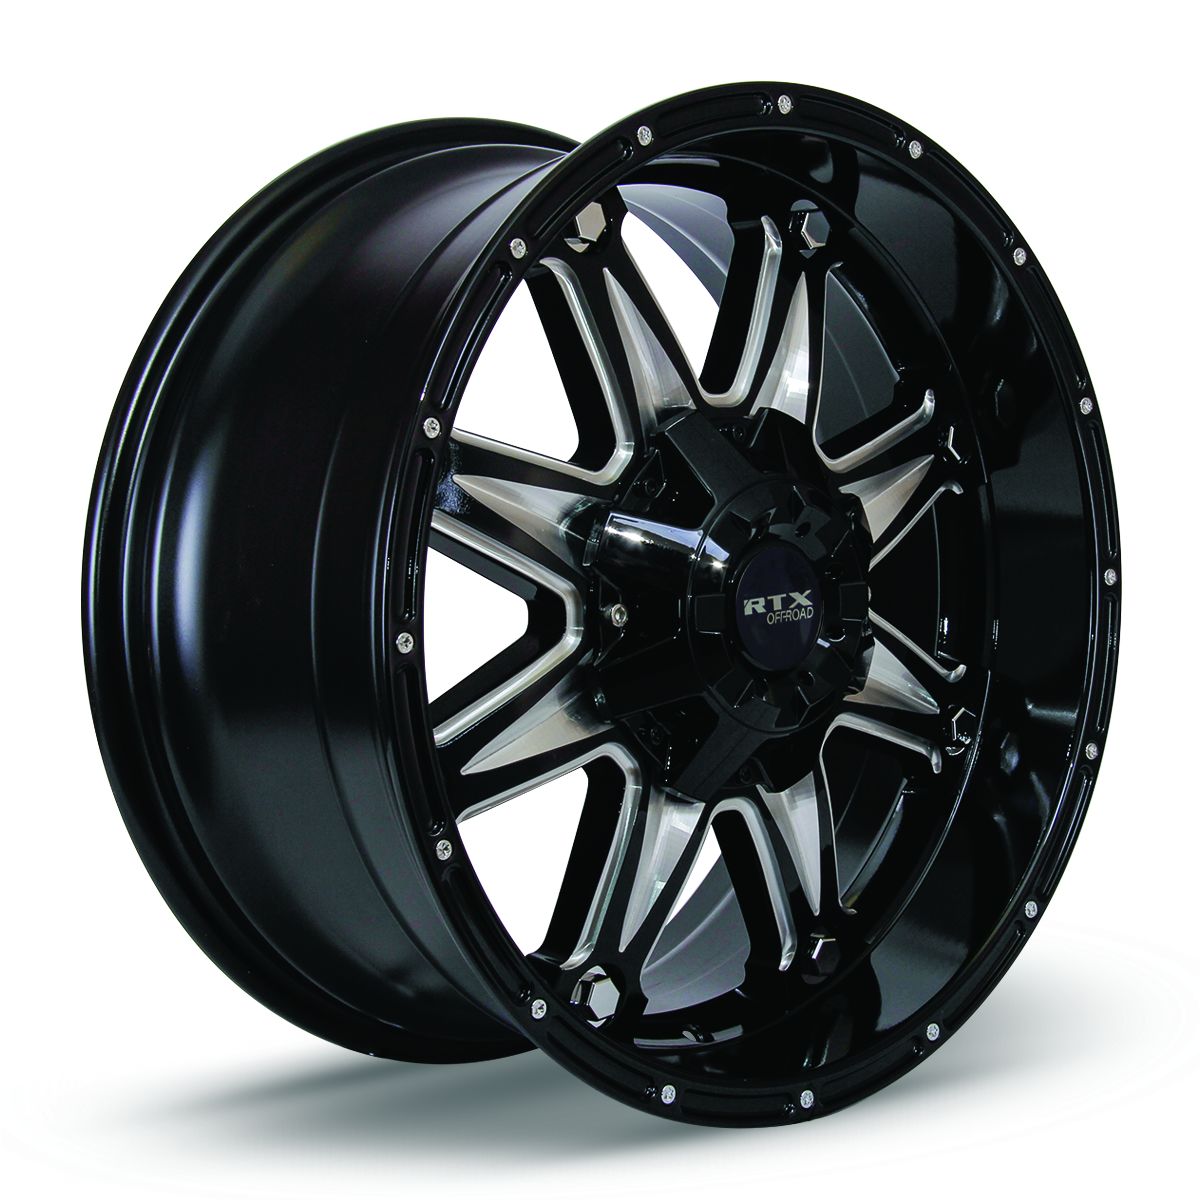 Spine • Black with Milled Spokes • 18x9 8x180 ET15 CB125